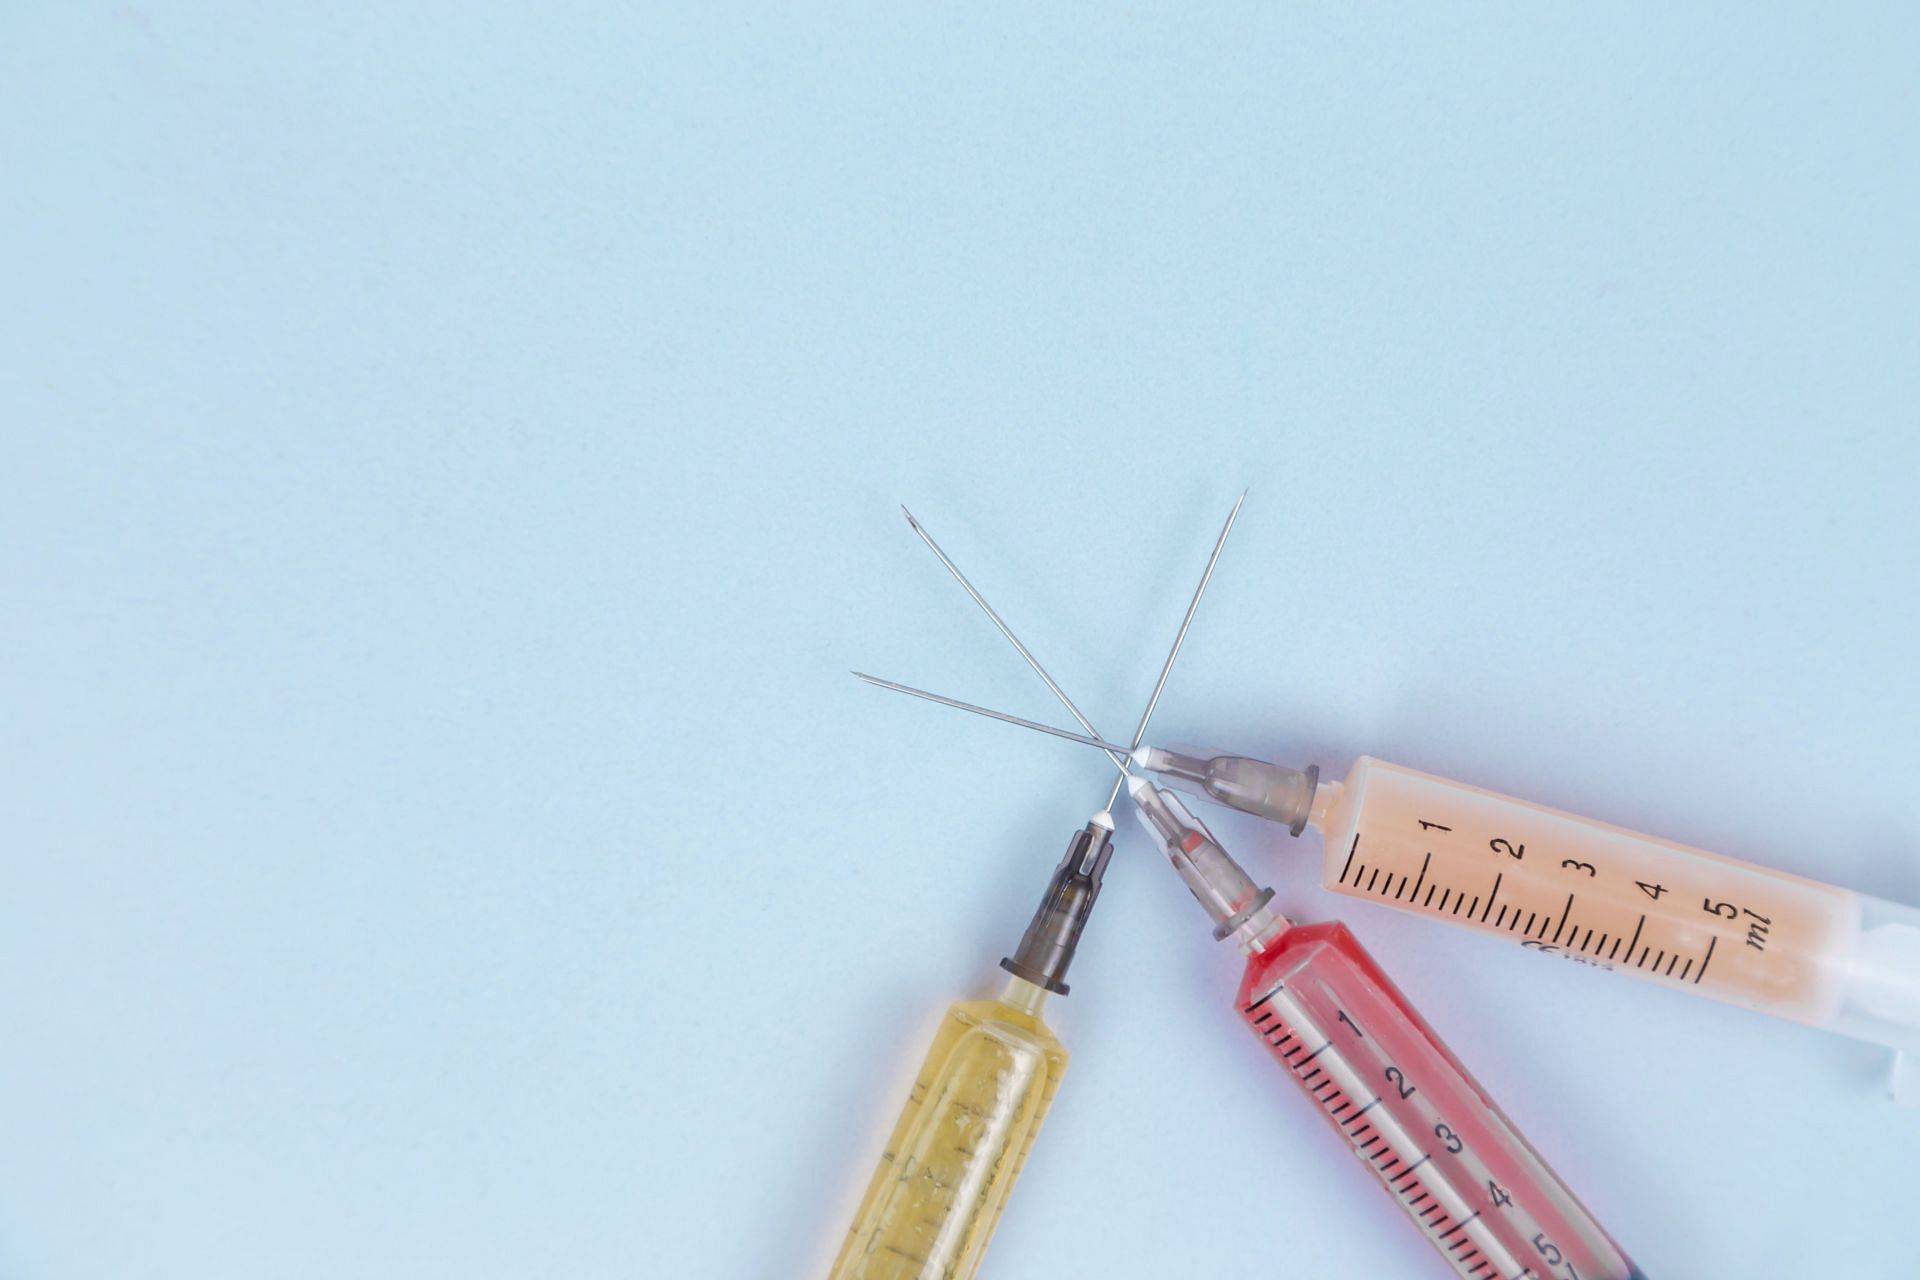 Weight loss injections are becoming popular nowadays. (Image via Unsplash/ Diana Polekhina)